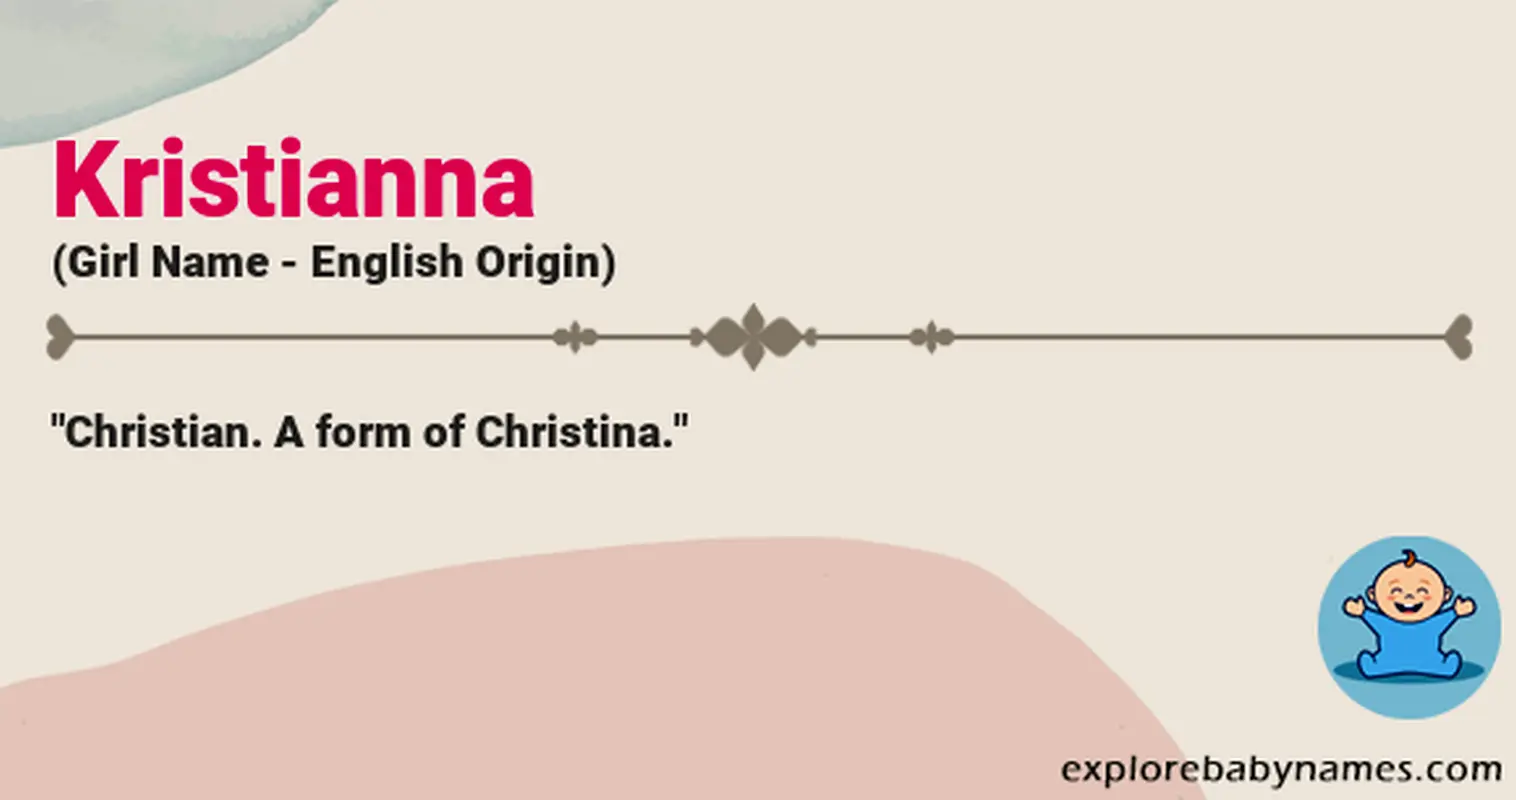 Meaning of Kristianna